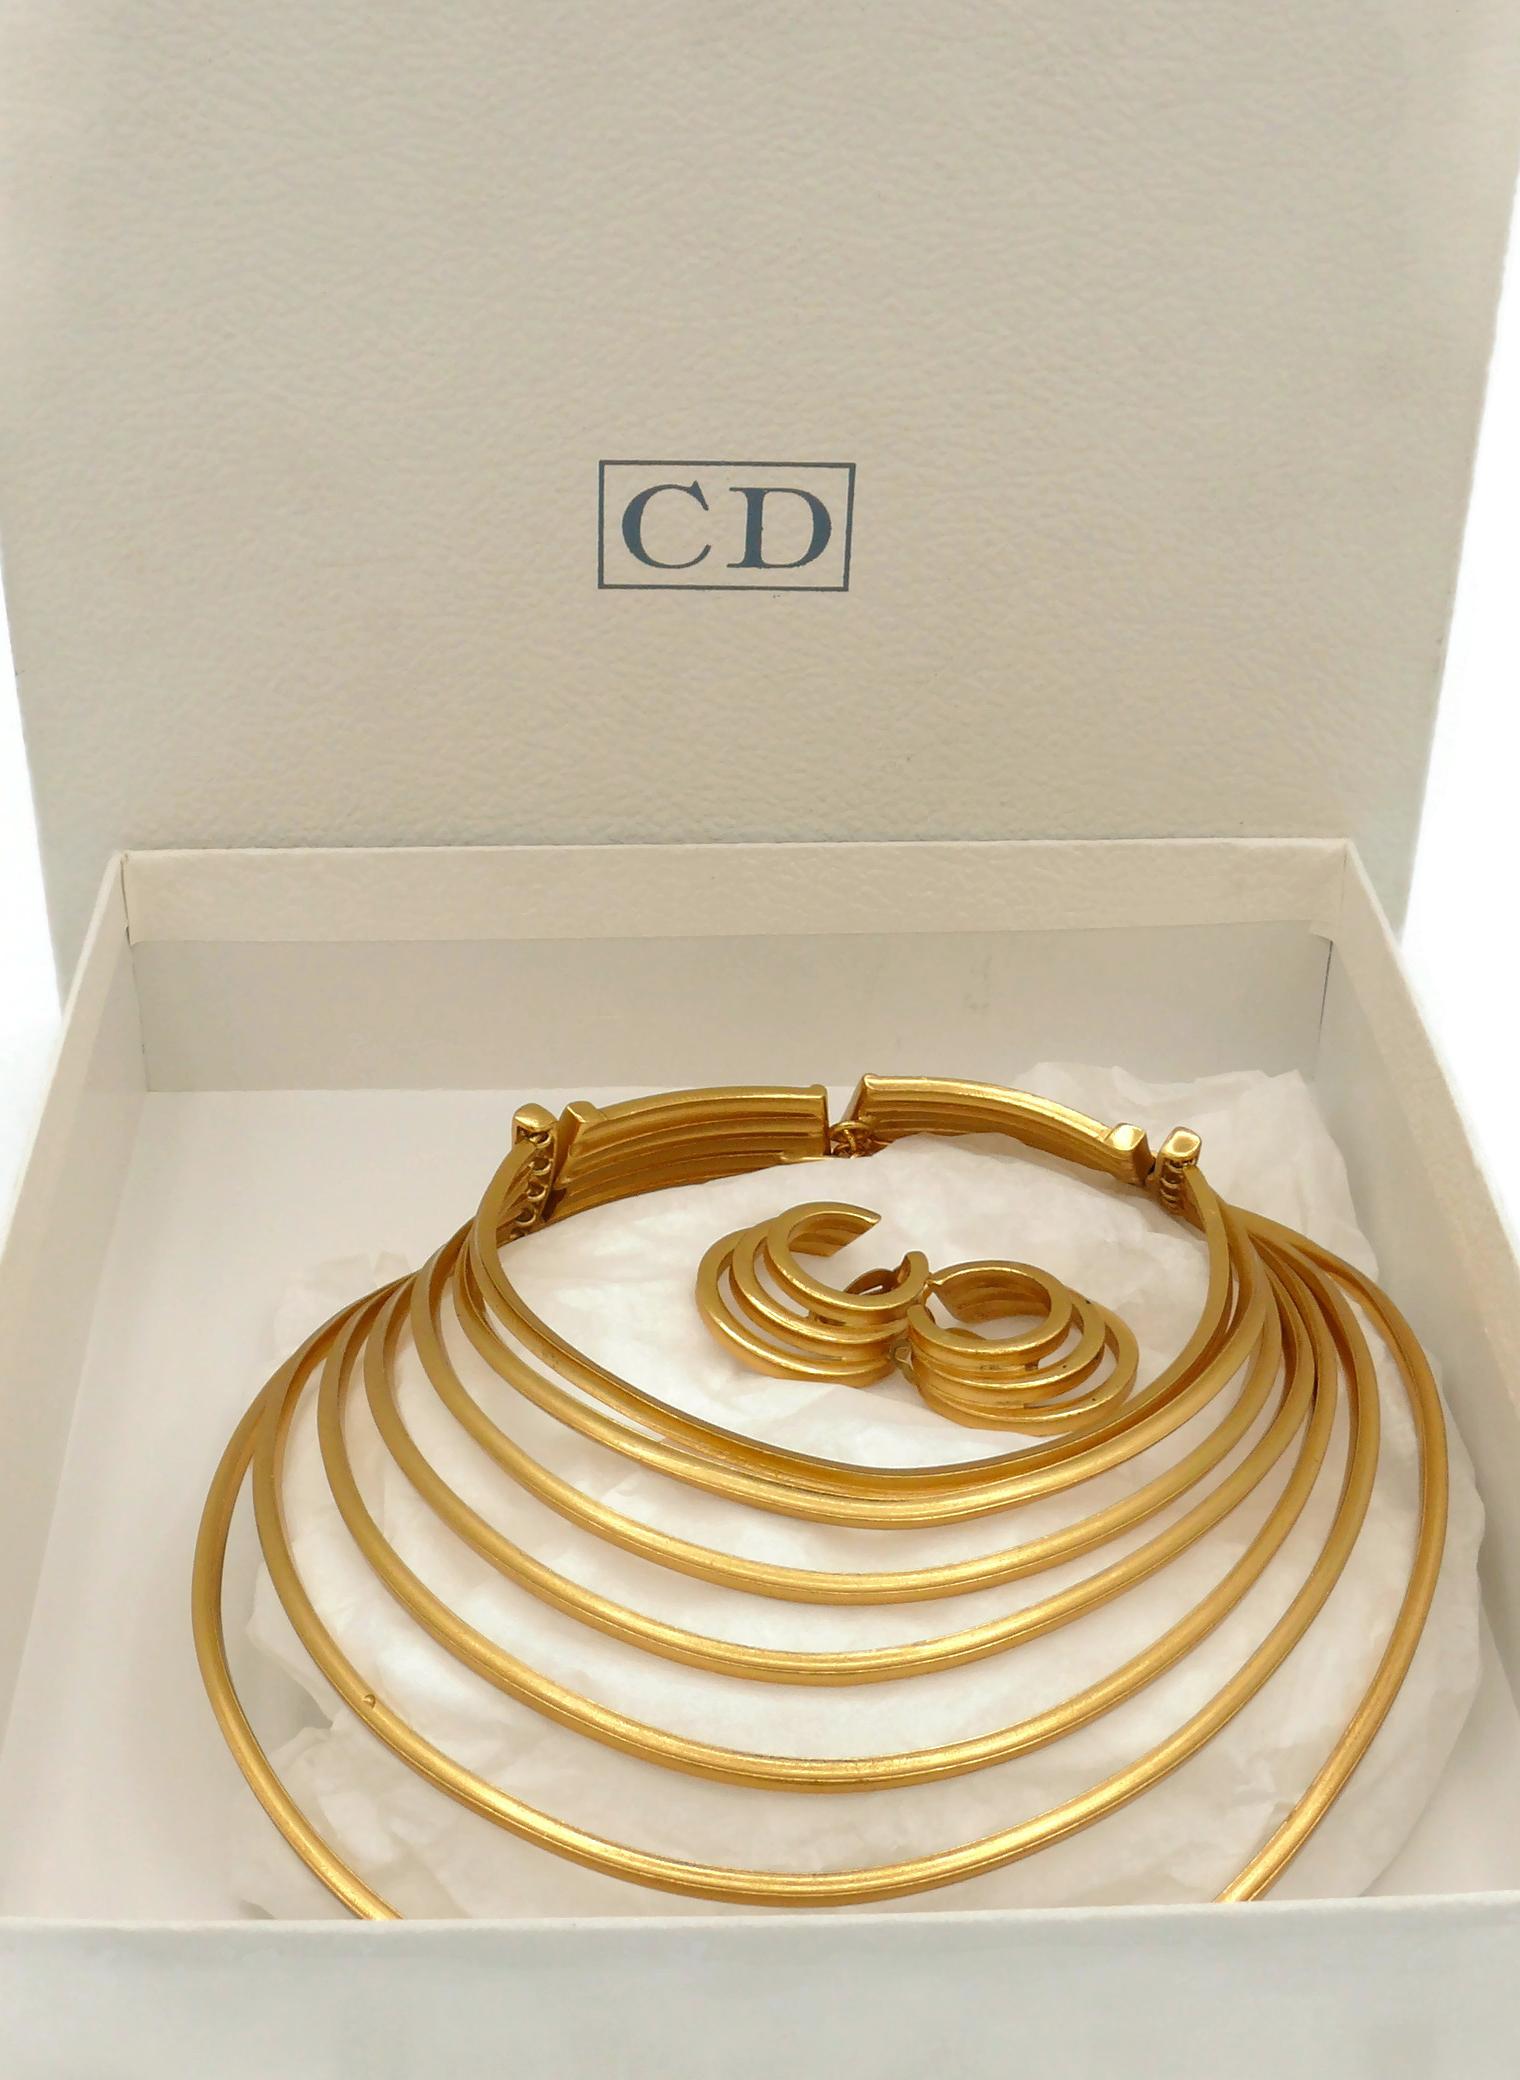 CHRISTIAN DIOR BOUTIQUE vintage rare and important gold toned multi strand choker necklace and hoop earring set.

Simplified model to be compared to the creations of CHRISTIAN DIOR by JOHN GALLIANO for the Spring/Summer 1998 runway looks (see